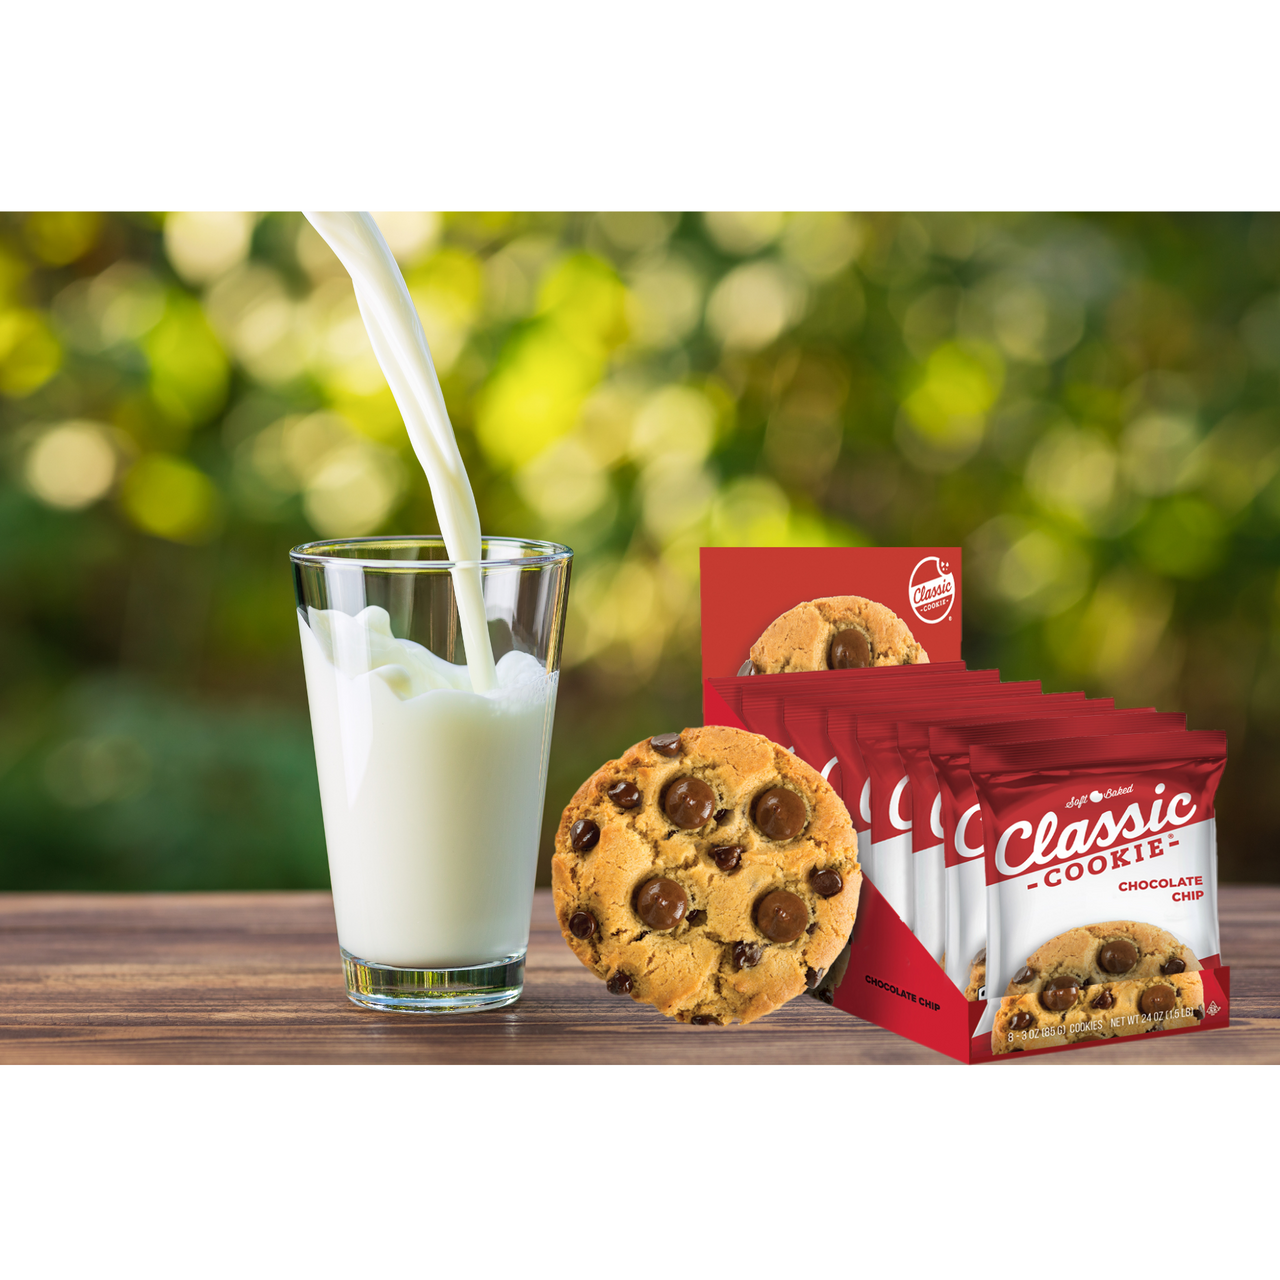 Classic Cookie Soft Baked Cookies, 8 Individually Wrapped Cookies Per Box  (Double Chocolate, 4 Boxes)